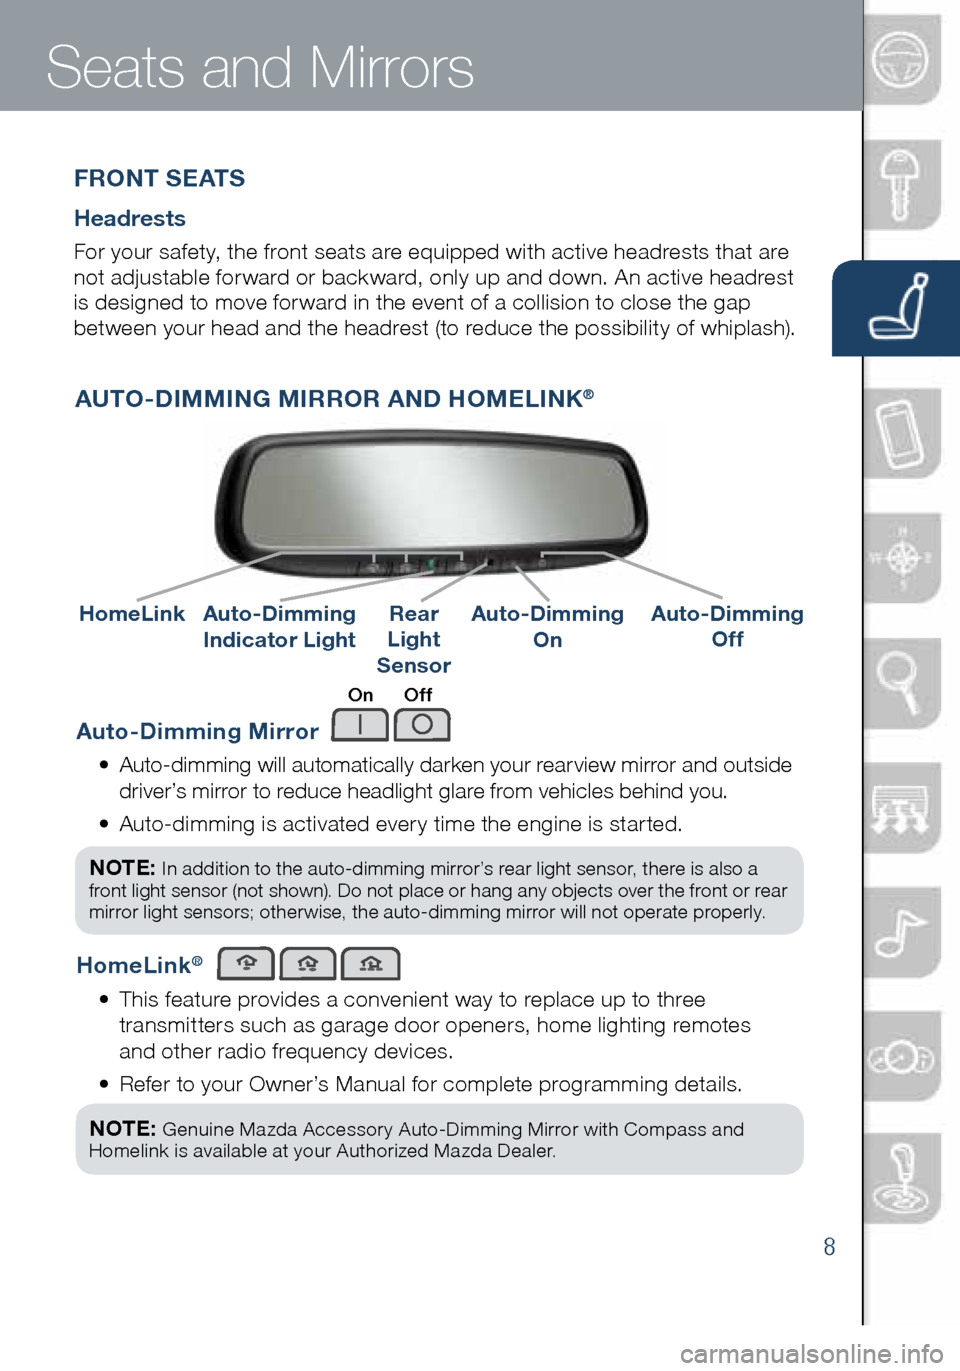 MAZDA MODEL 3 HATCHBACK 2016  Smart Start Guide (in English) 8
Auto-Dimming Mirror
•   Auto-dimming will automatically darken your rearview mirror and outside 
driver’s mirror to reduce headlight glare from vehicles behind you. 
•    Auto-dimming is activ